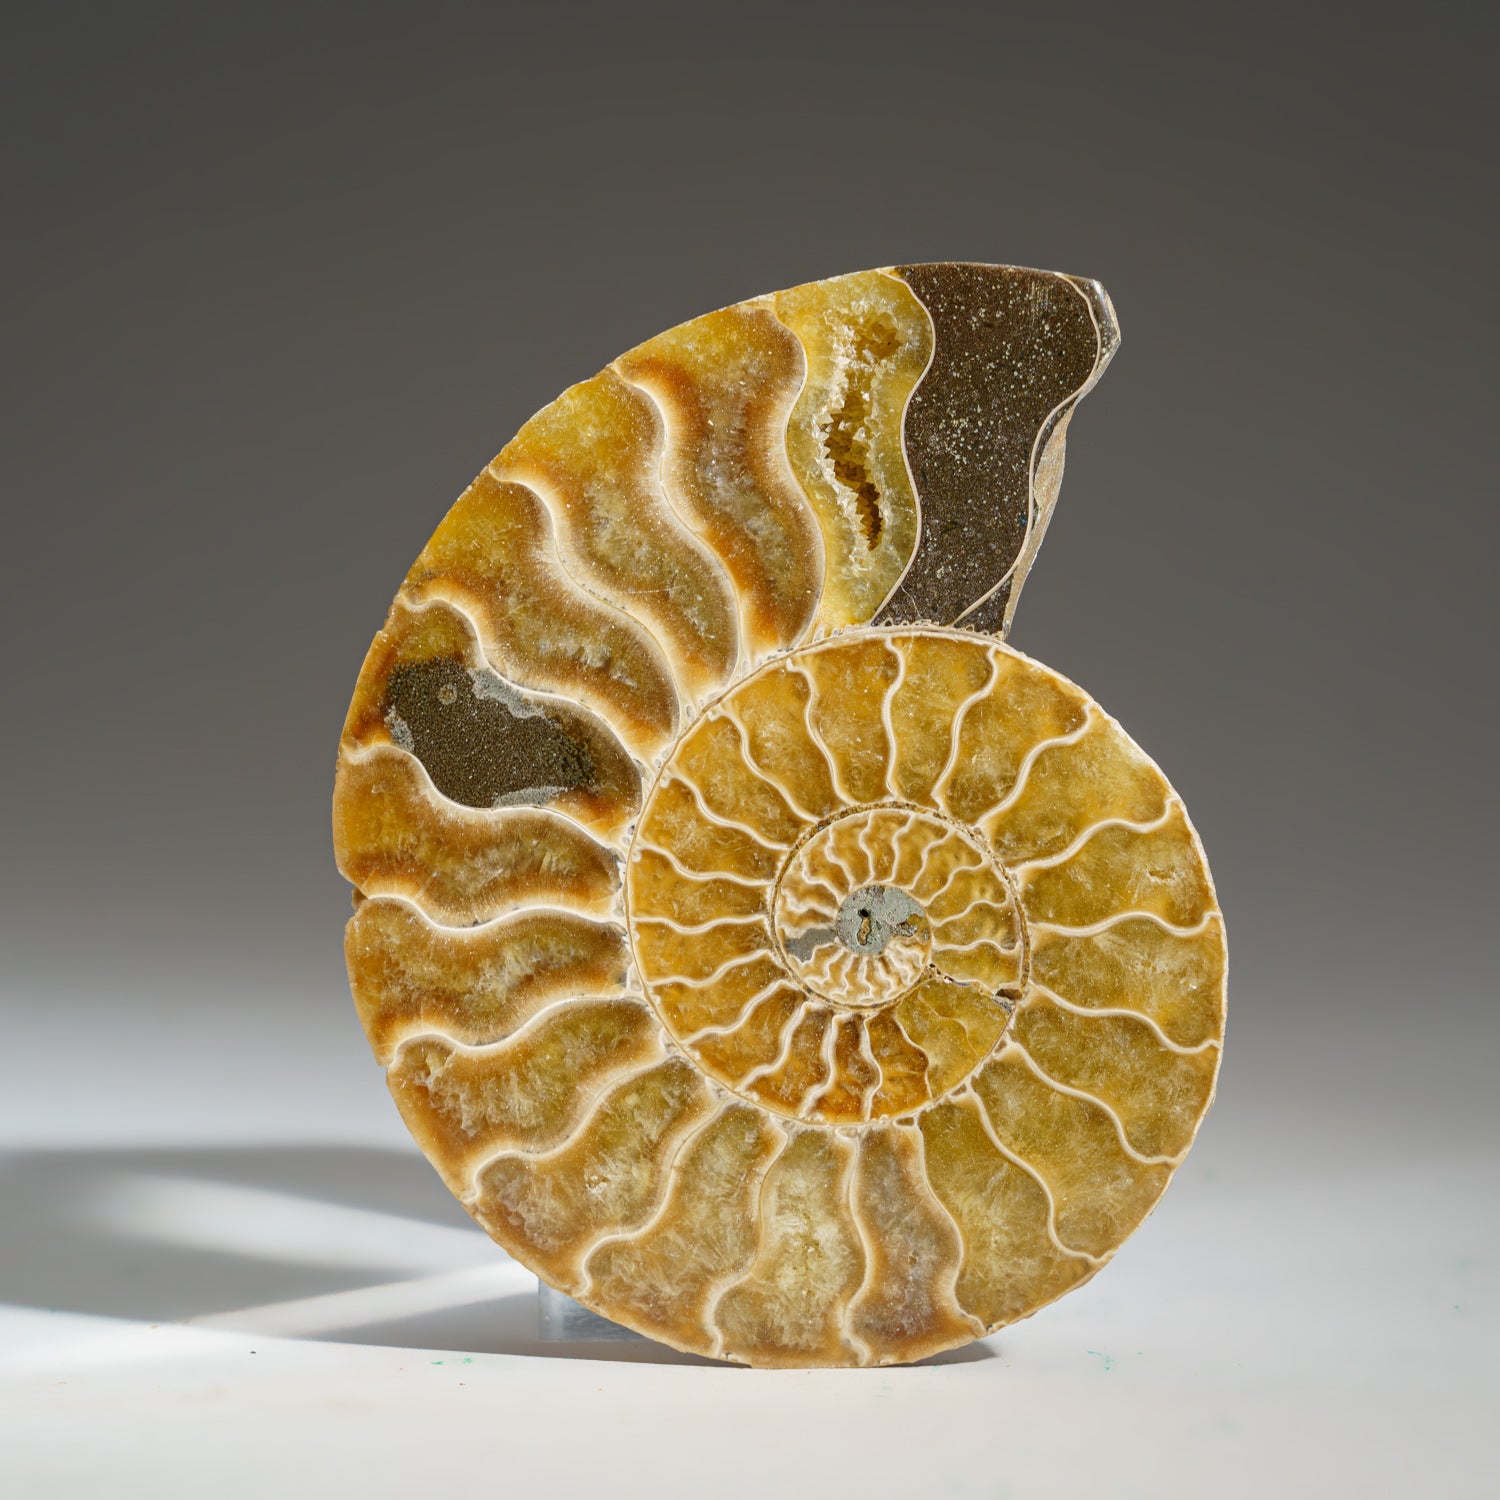 Calcified Ammonite Halve From Madagascar (218.8 grams)